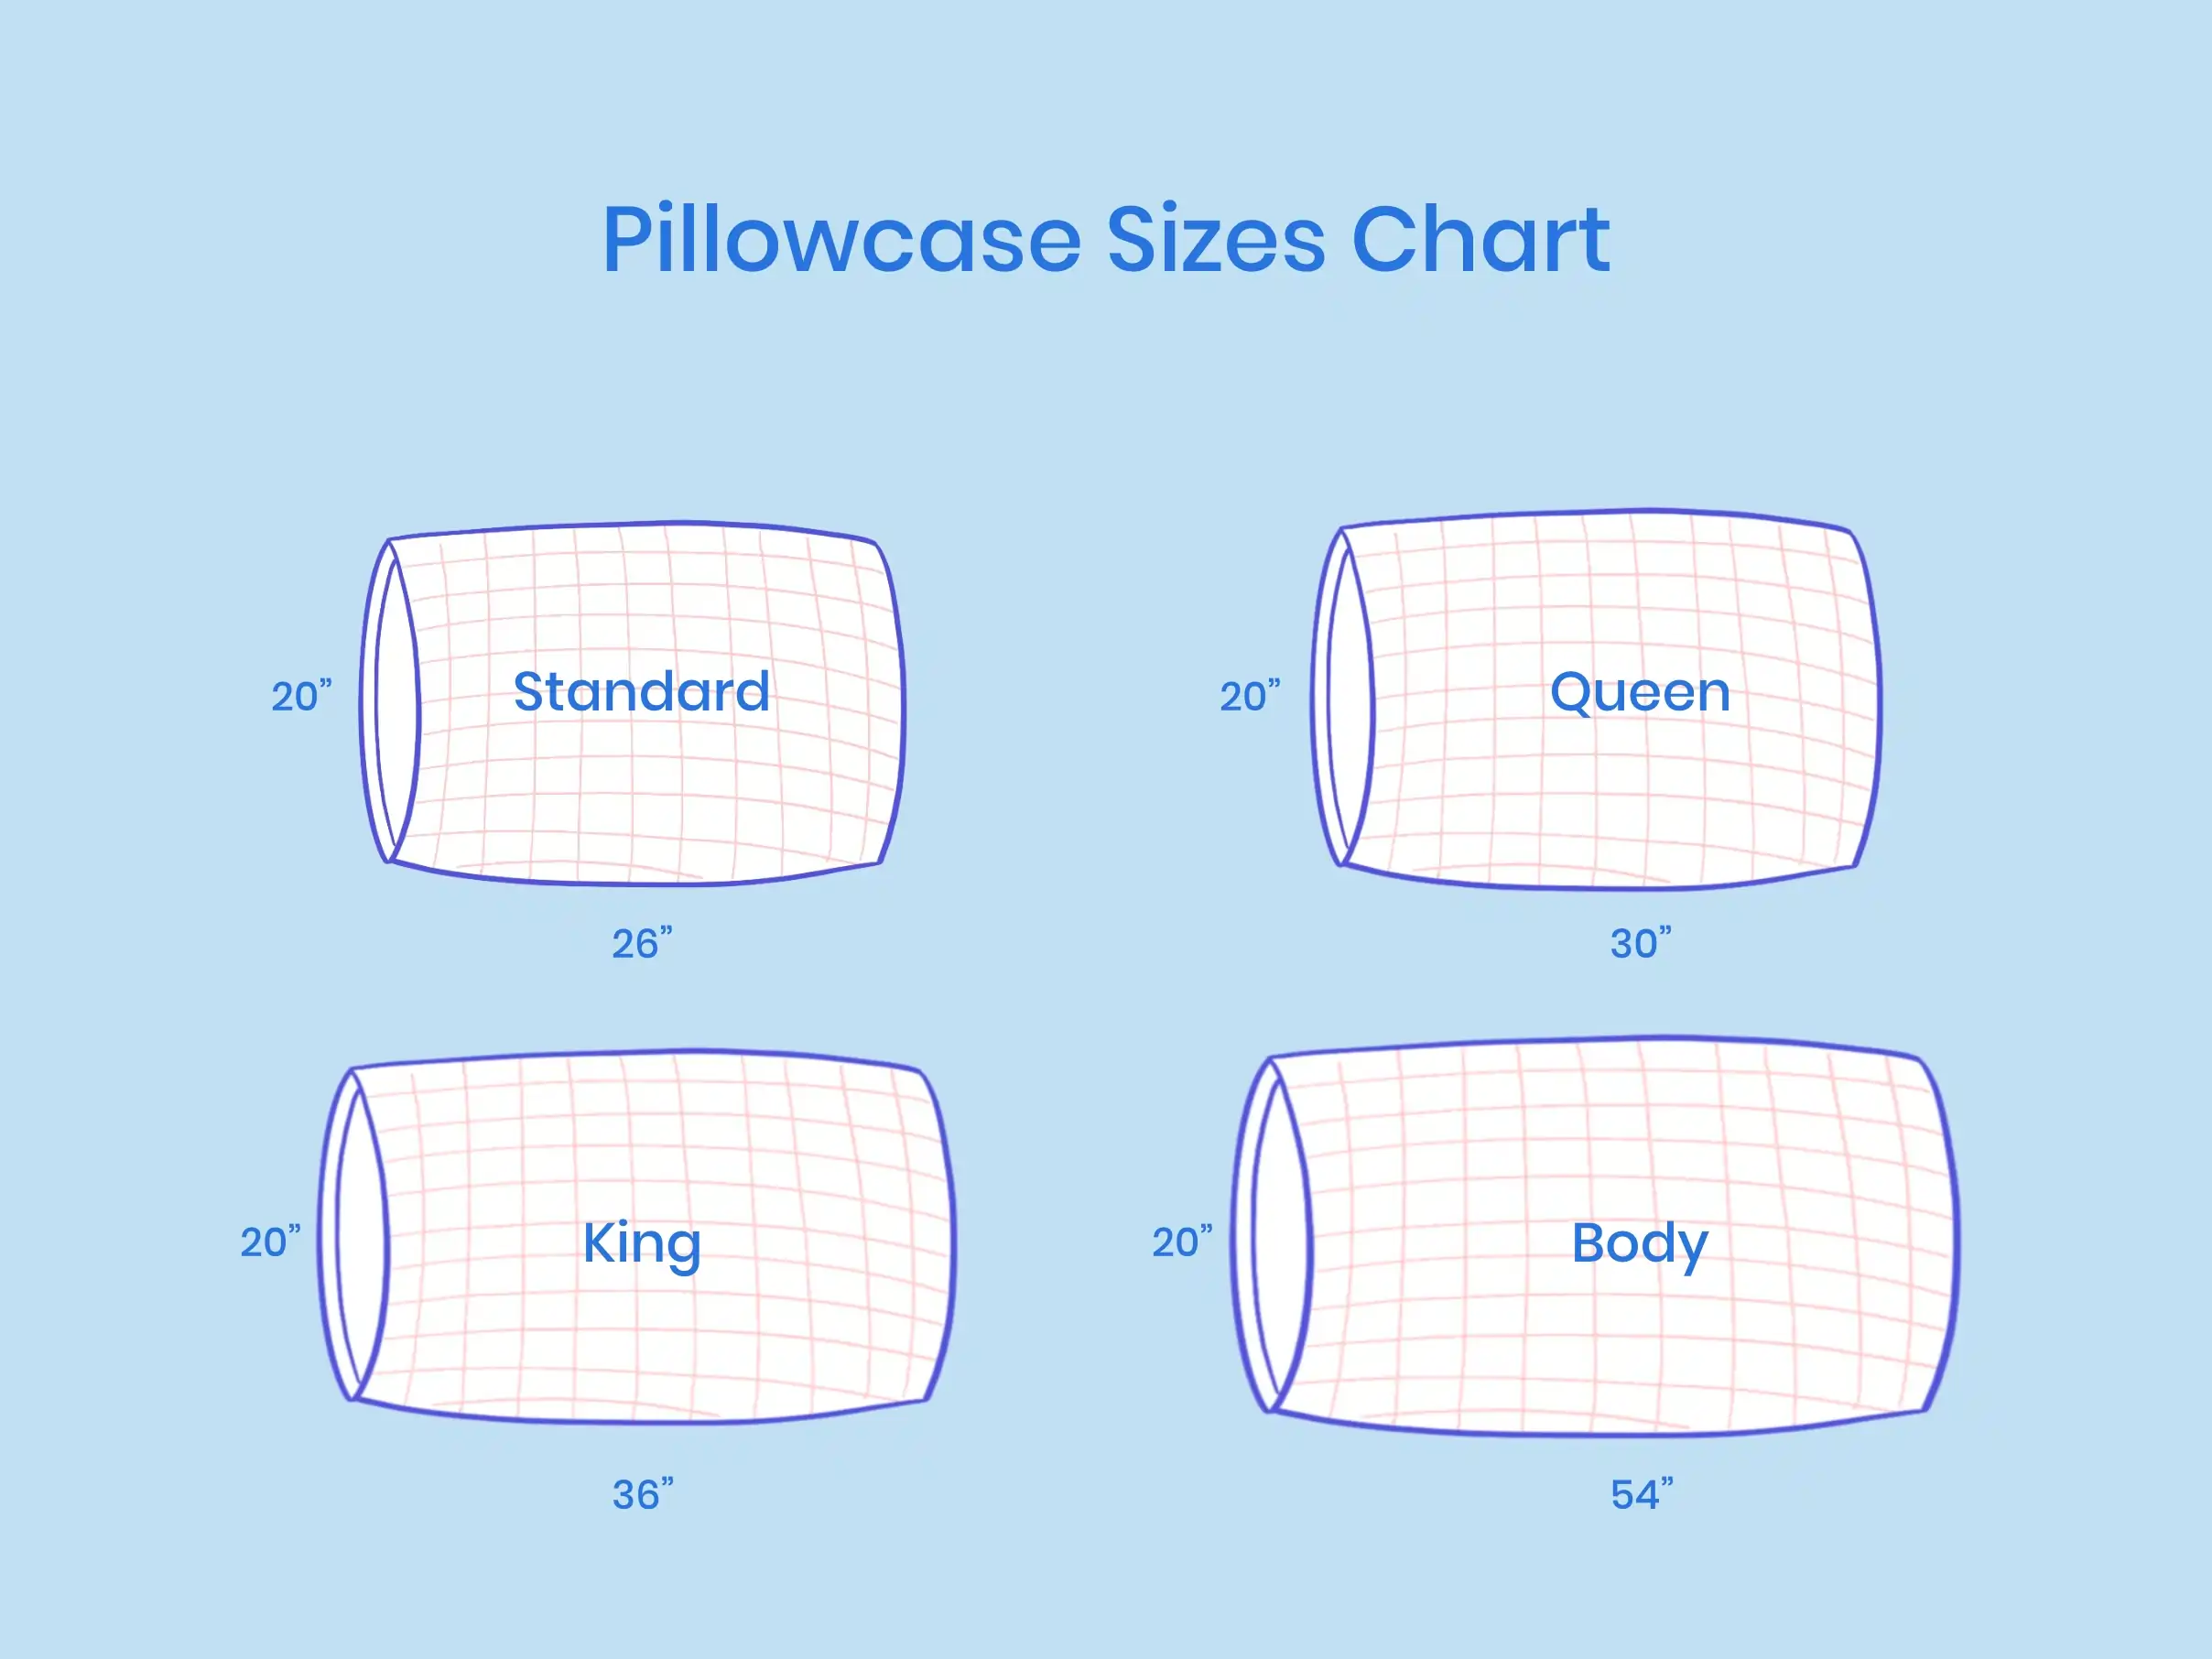 A Short Guide for Choosing the Right Pillow Filling